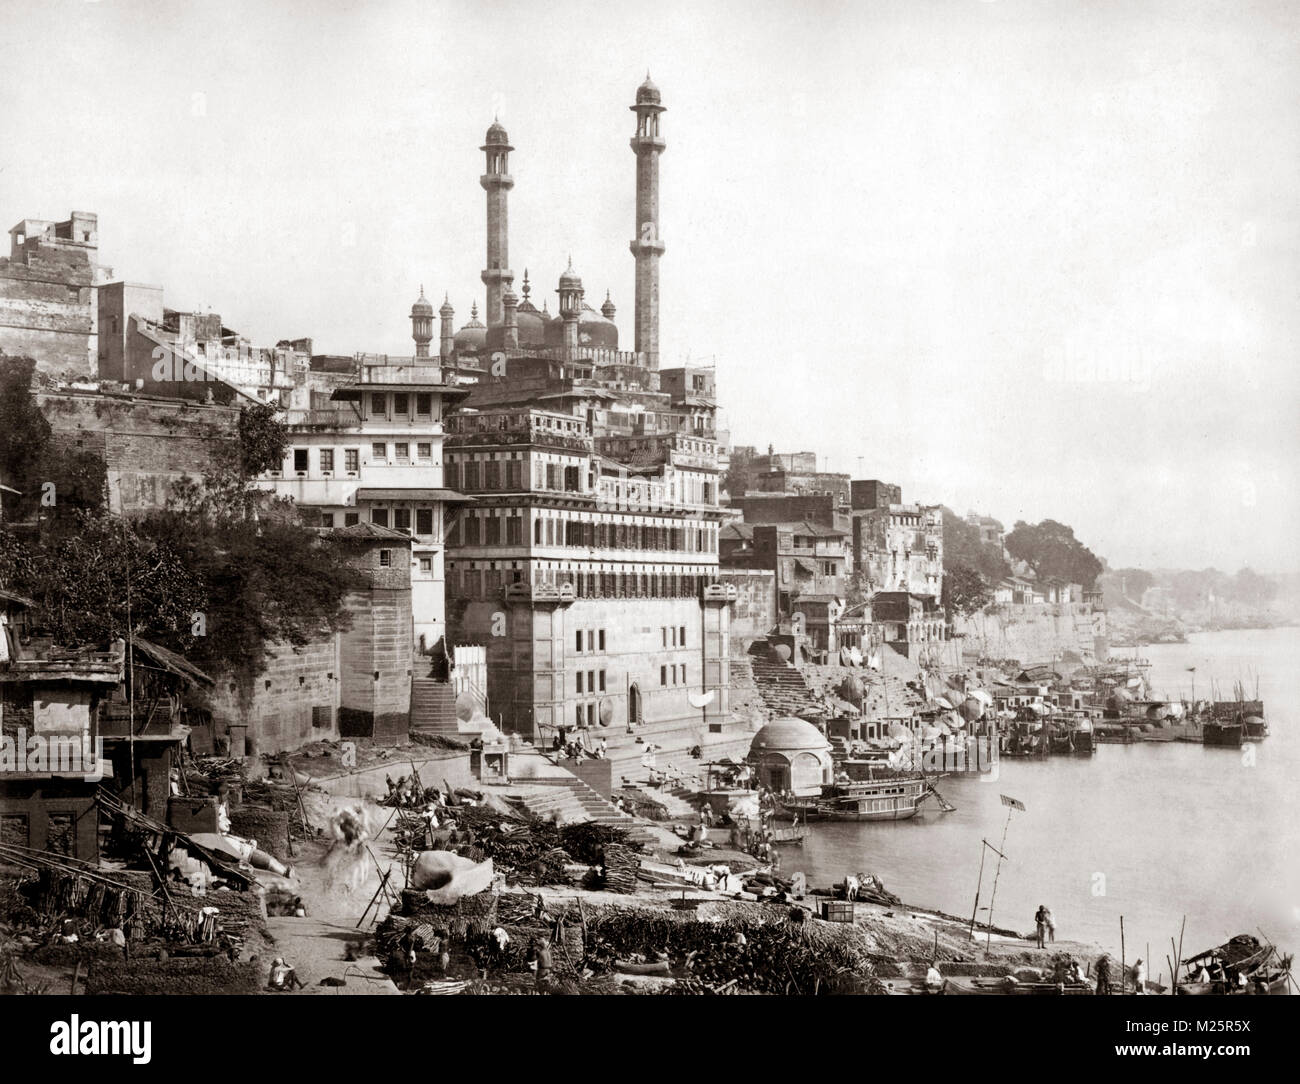 c. 1880s India - along the ghats, River Ganges, Varanasi / Benares with the Alamgir mosque Stock Photo